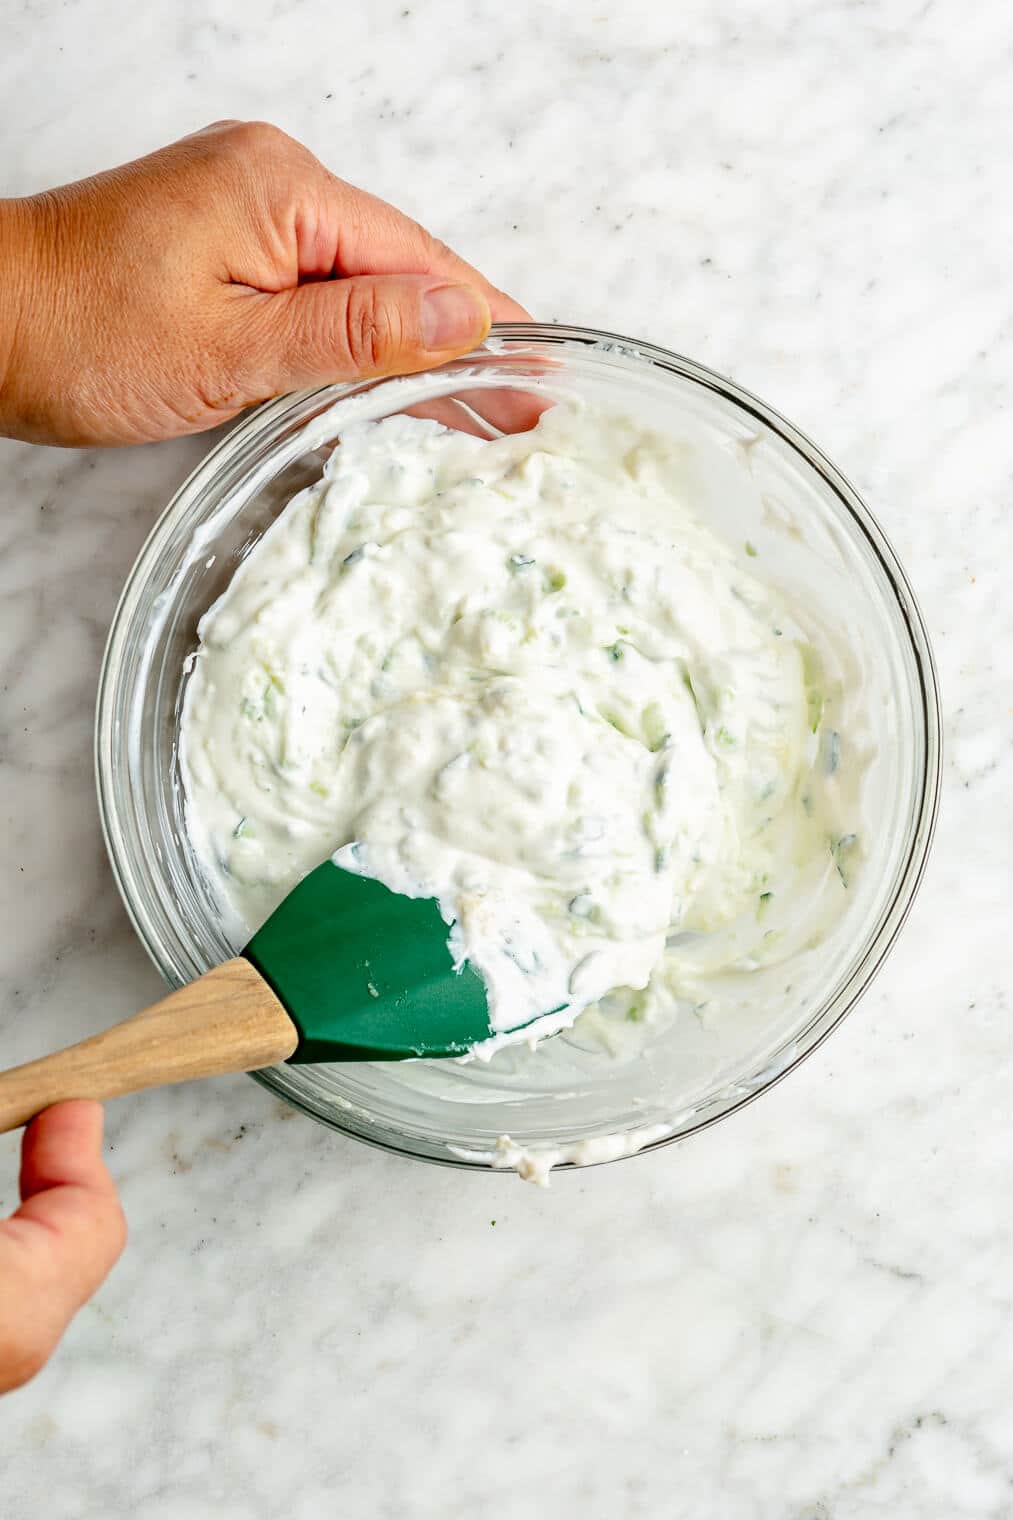 A person using a rubber spatula to stir together a homemade tzatziki sauce in a small glass bowl.